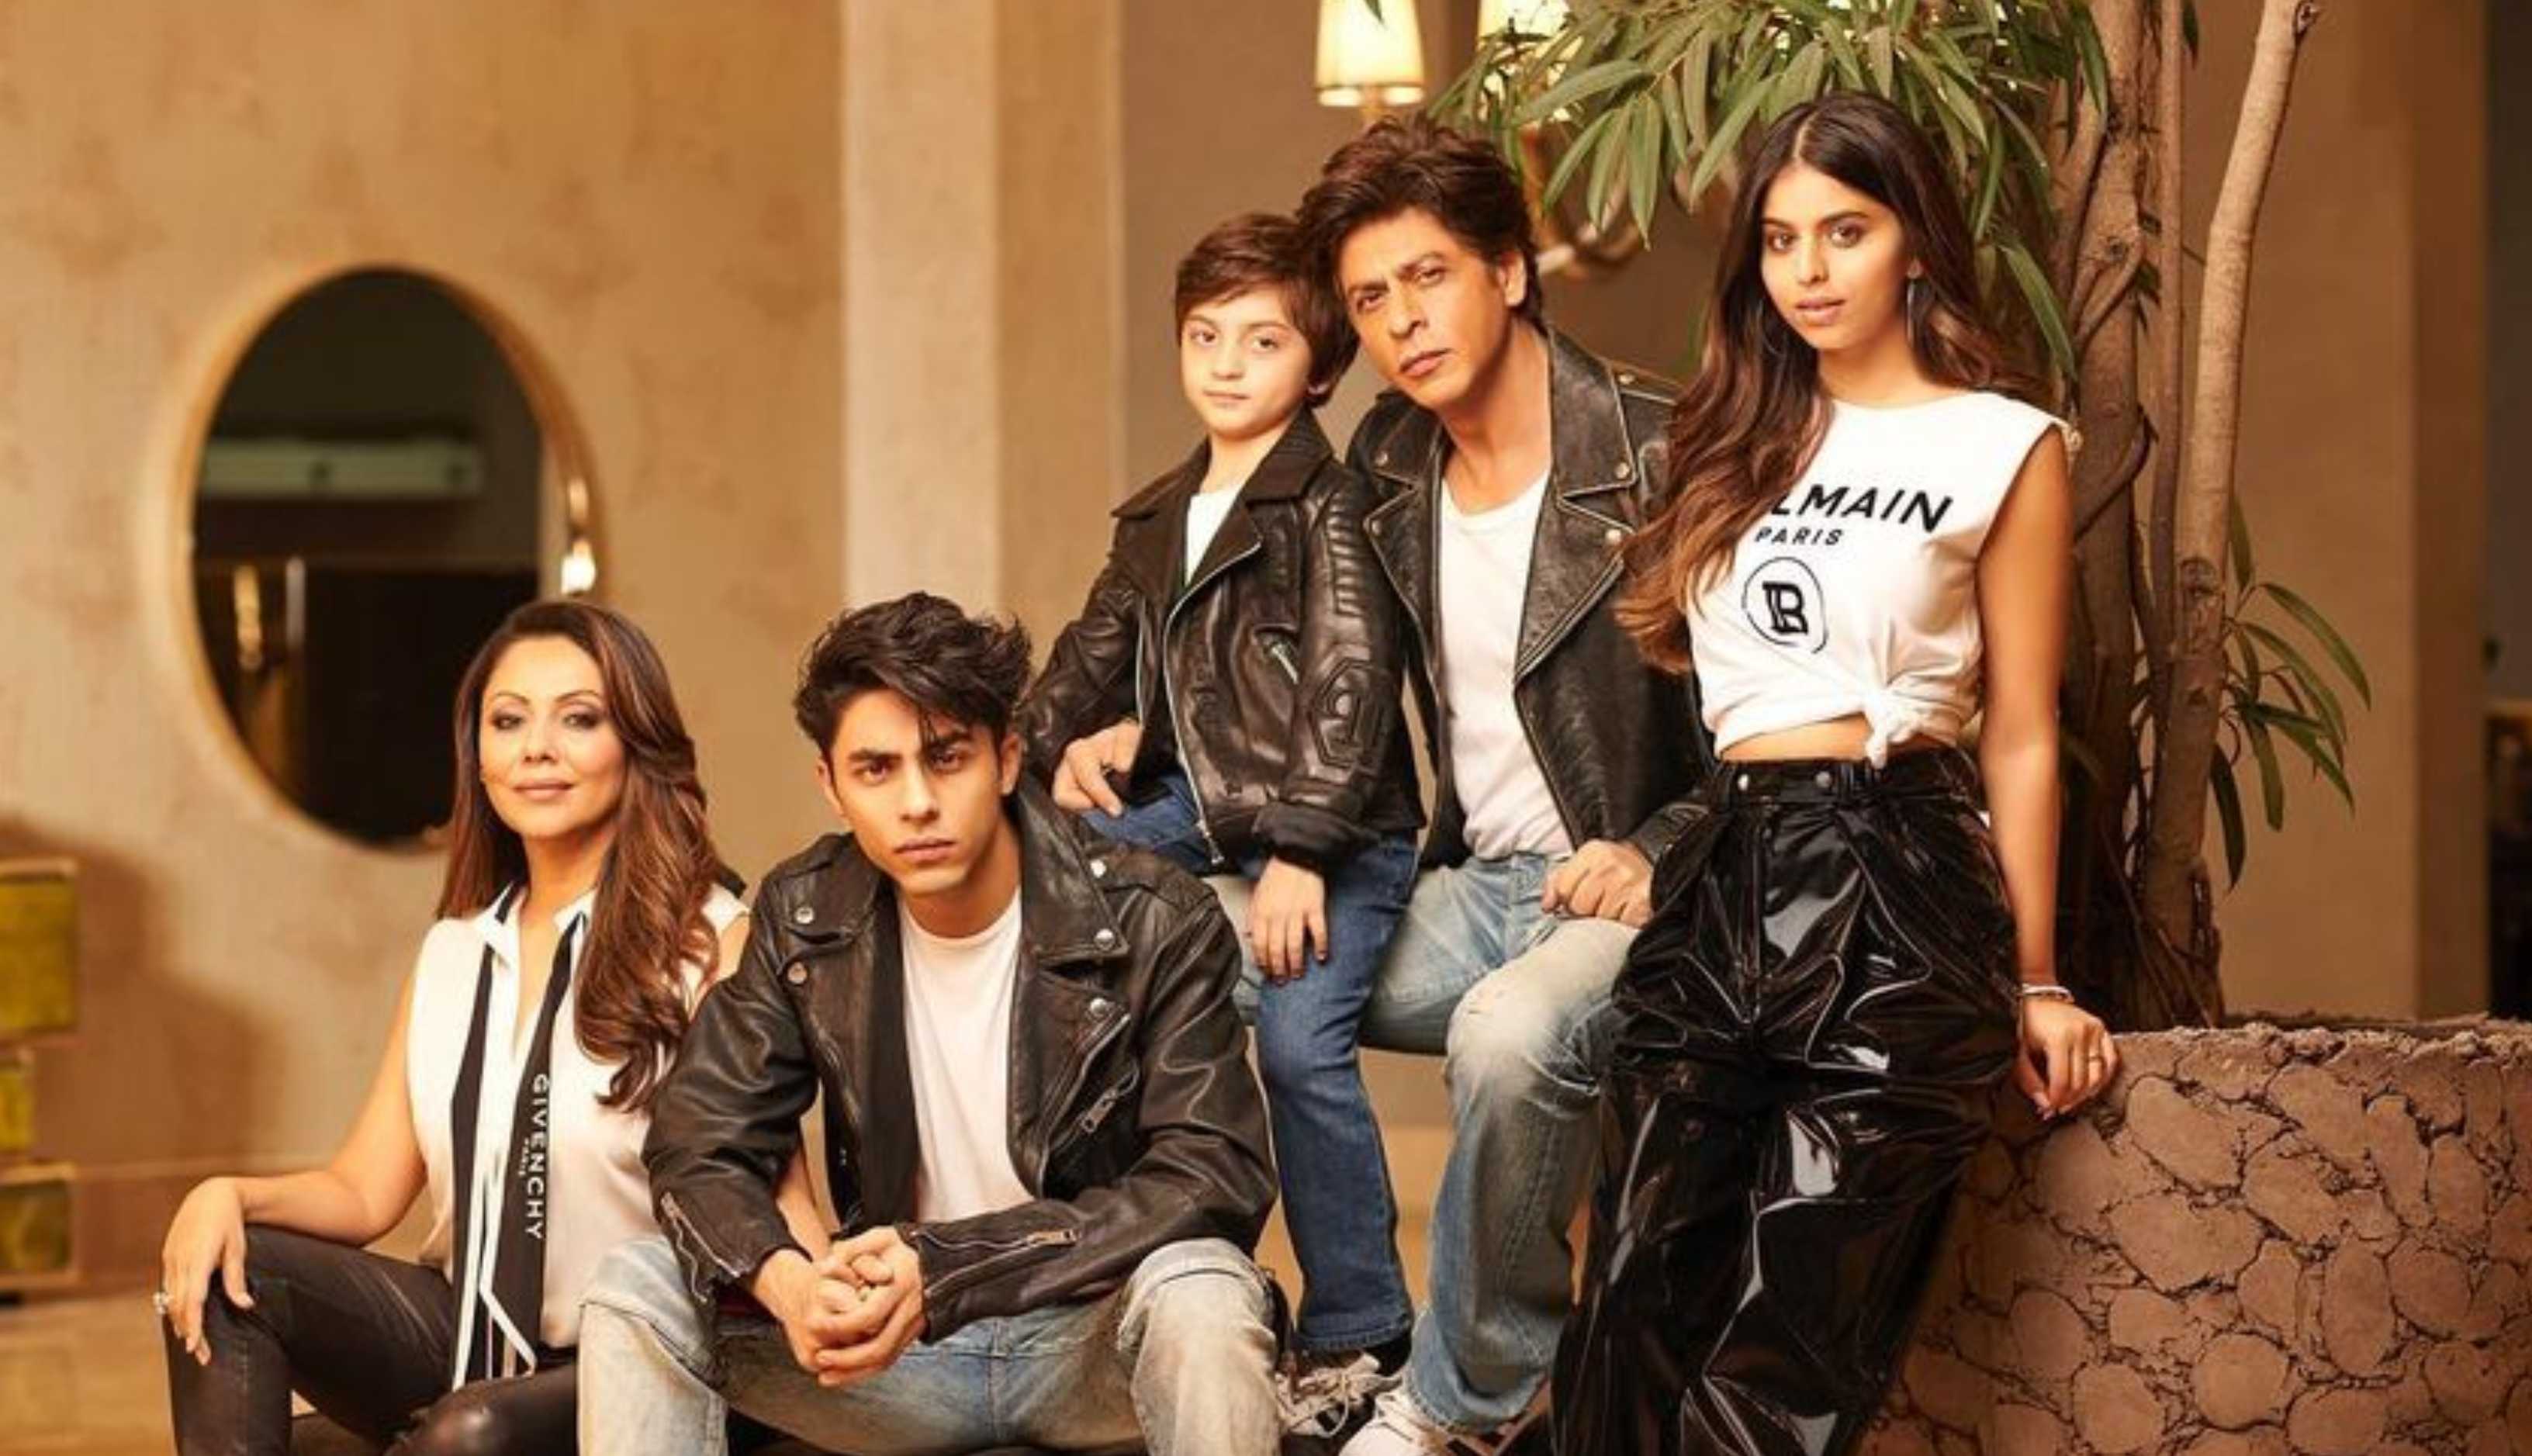 Shah Rukh Khan reveals Suhana & Aryan convinced him to do action films like Jawan for AbRam: ‘My kids get impressed’